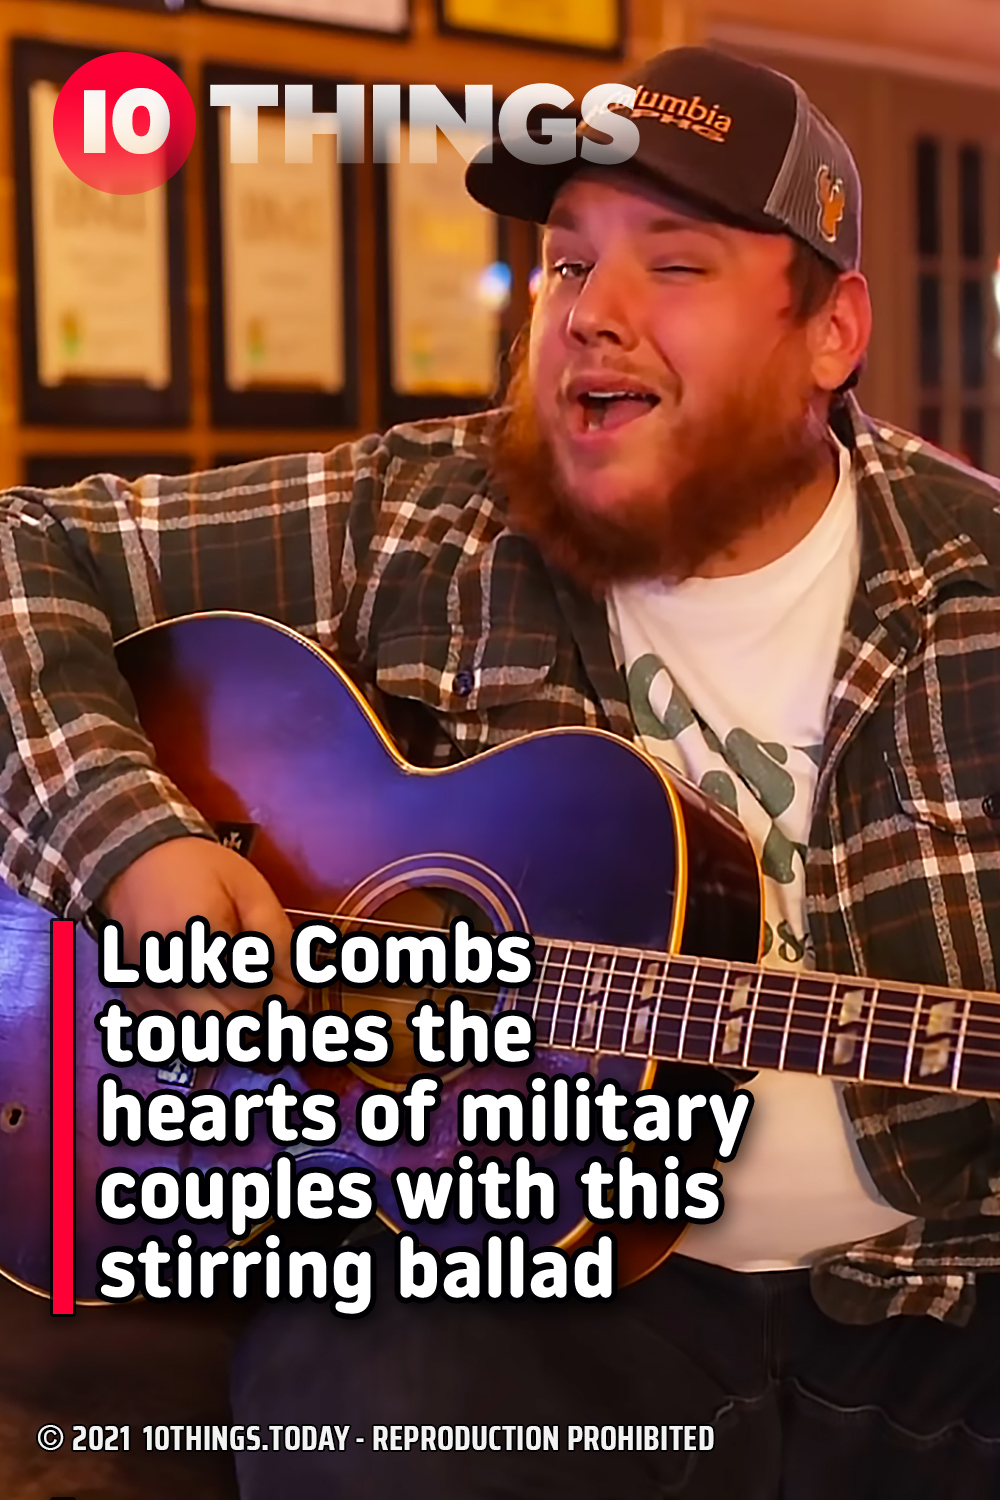 Luke Combs touches the hearts of military couples with this stirring ballad